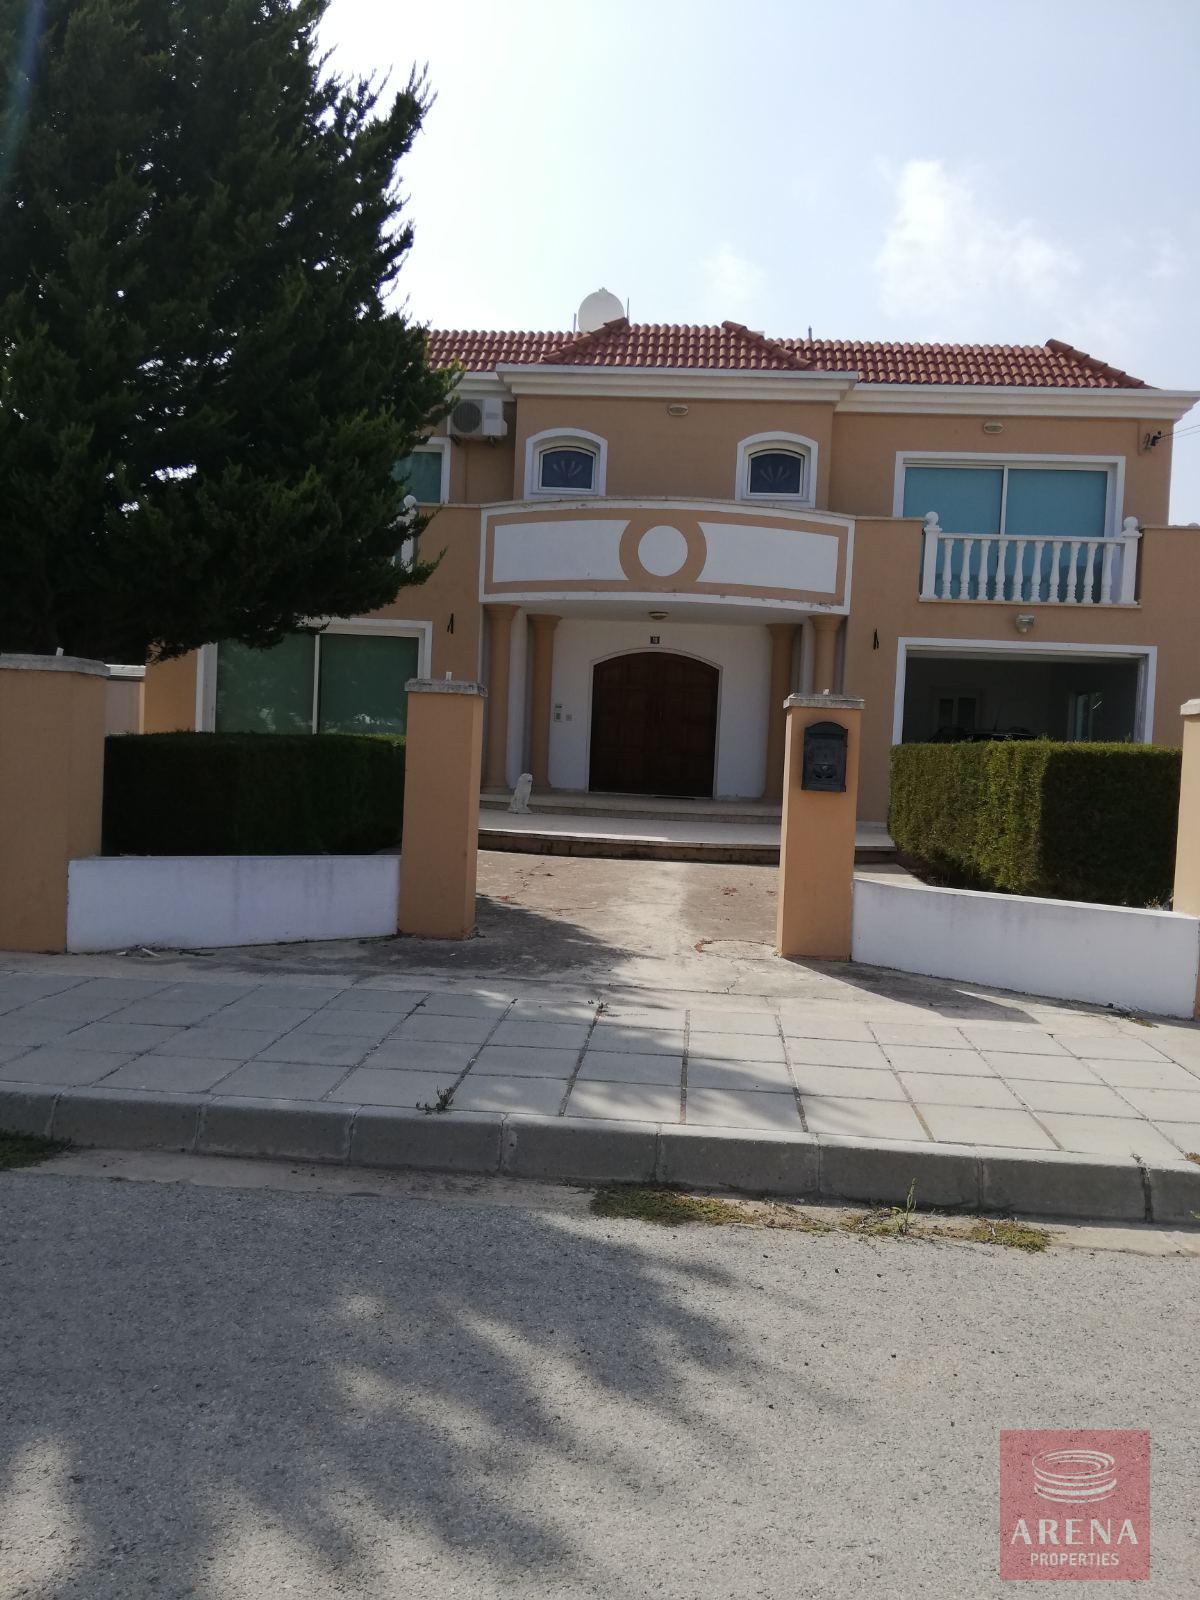 1 1 house for sale in paralimni